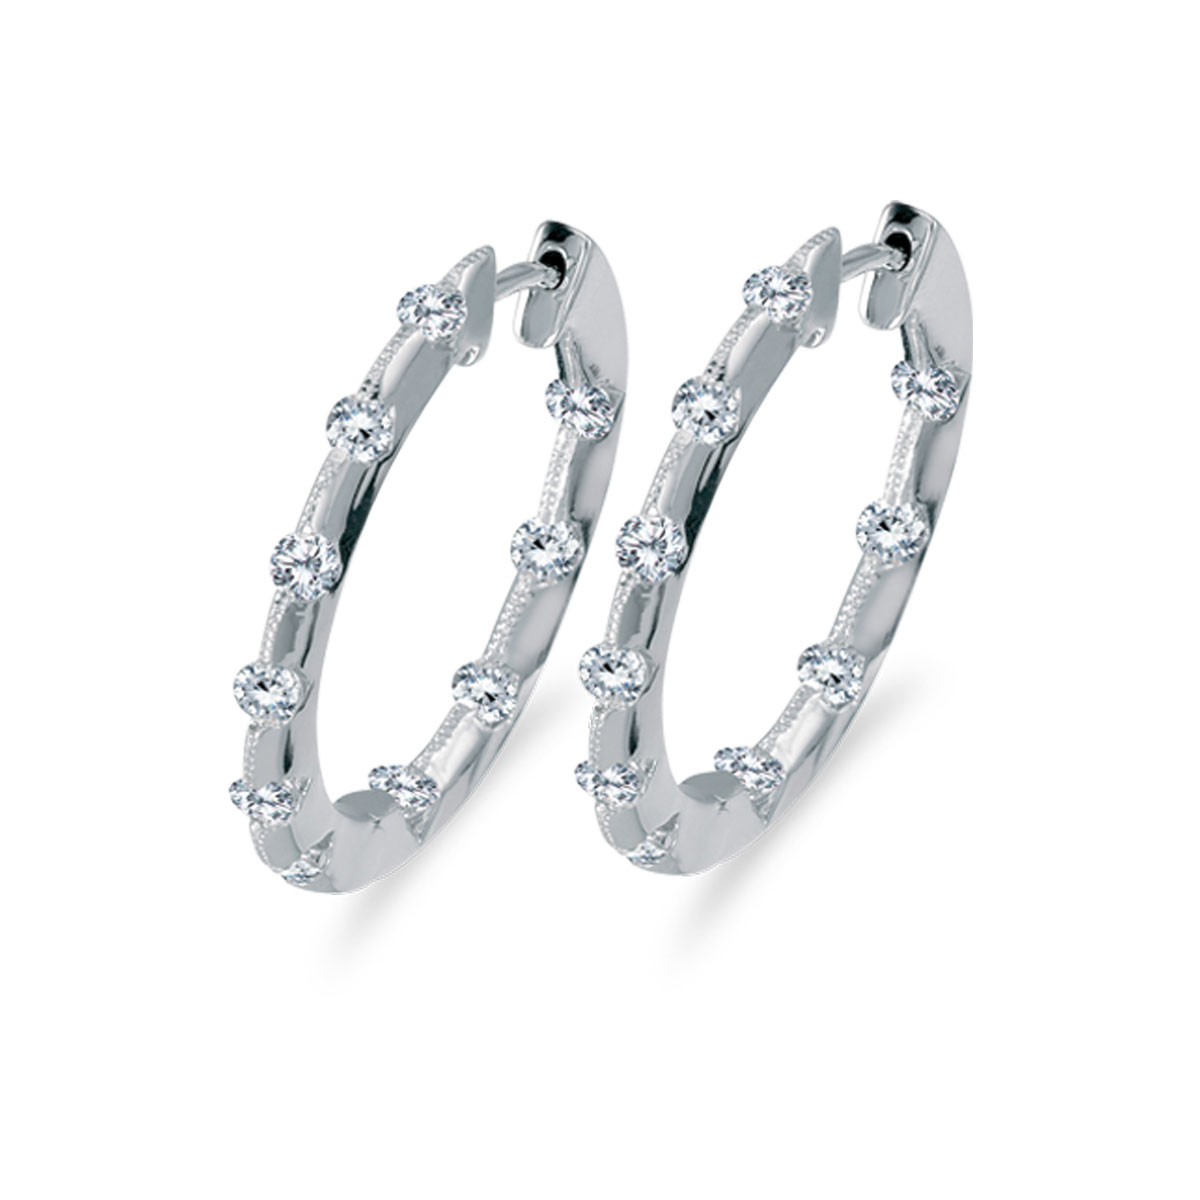 24 mm diamond inside/outside hoop earrings in beautiful 14k white gold. The perfect look for day ...